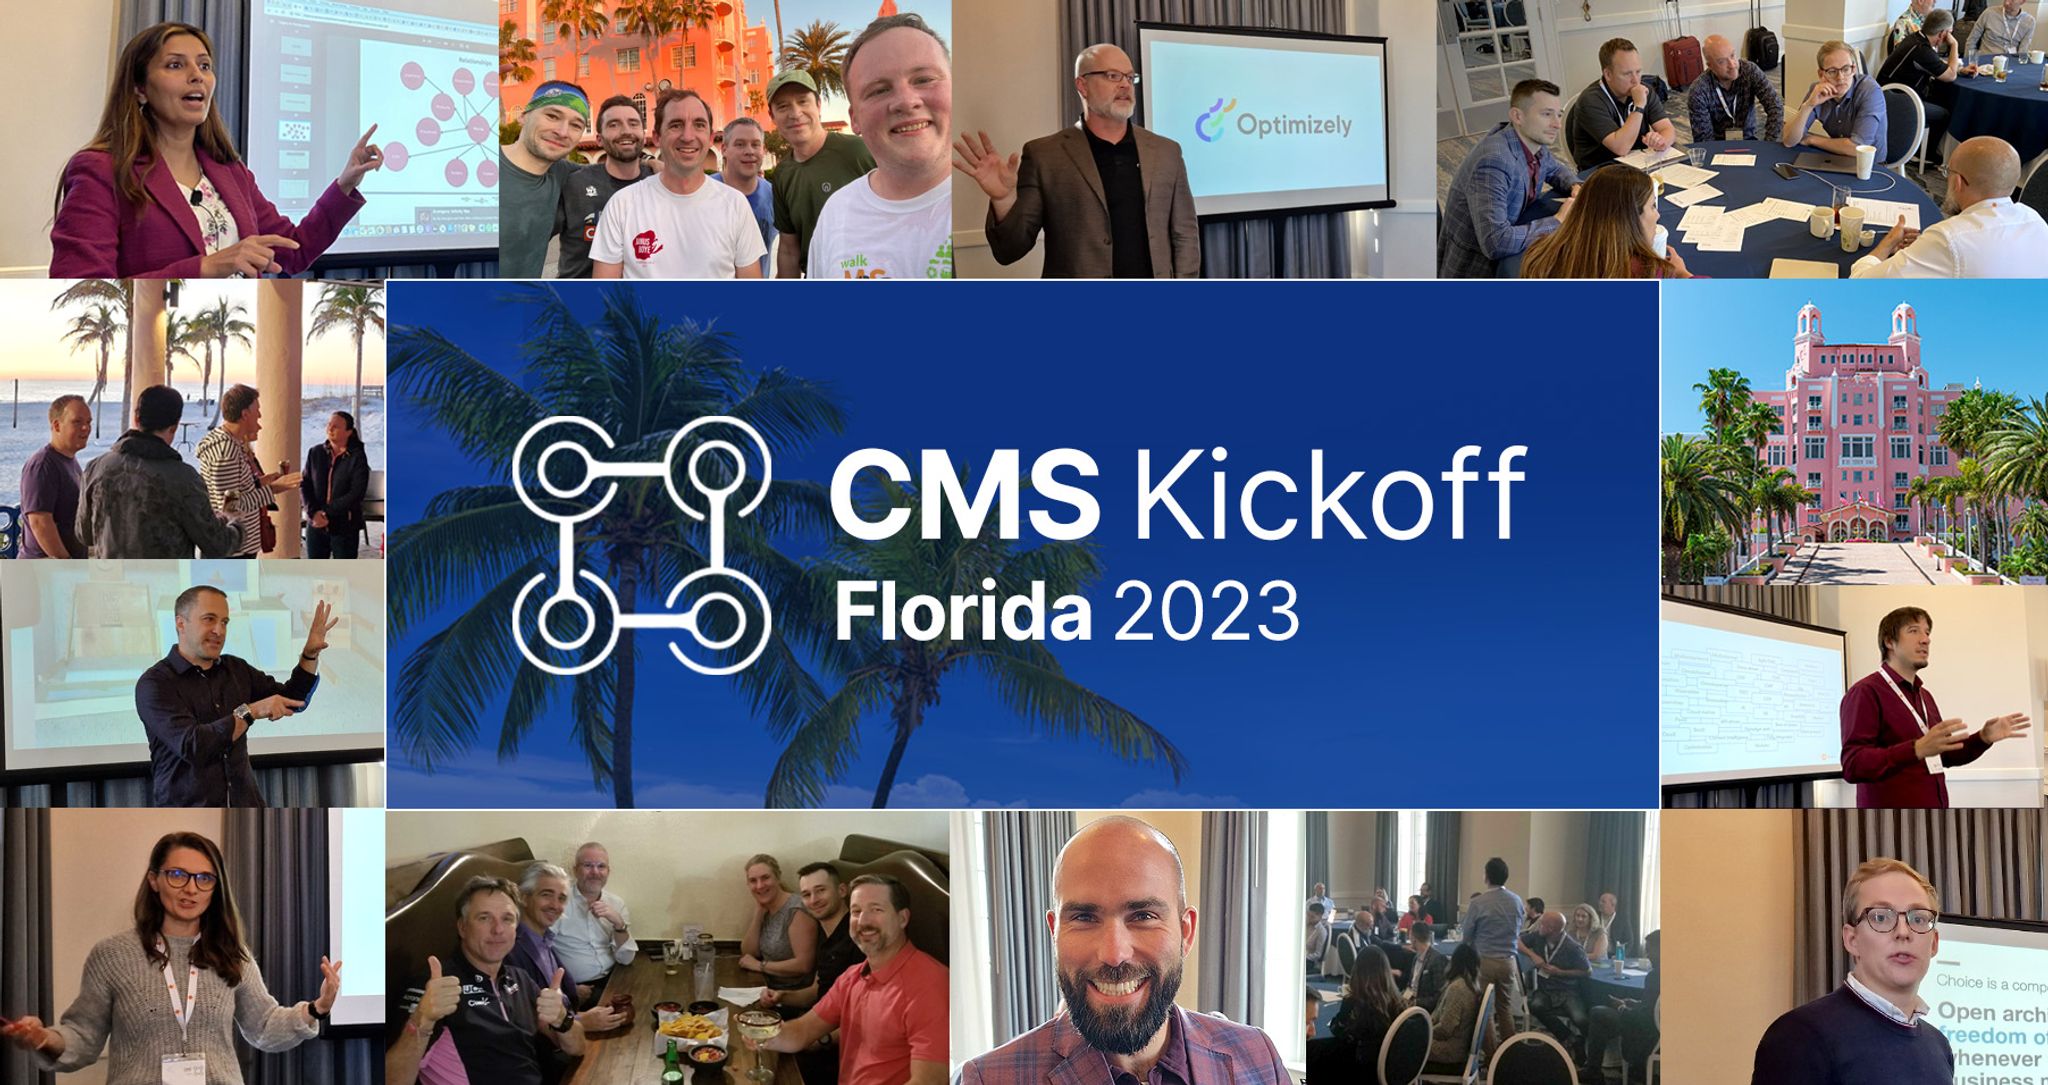 CMS Kickoff 2023 photo montage with images from the event of people and sessions